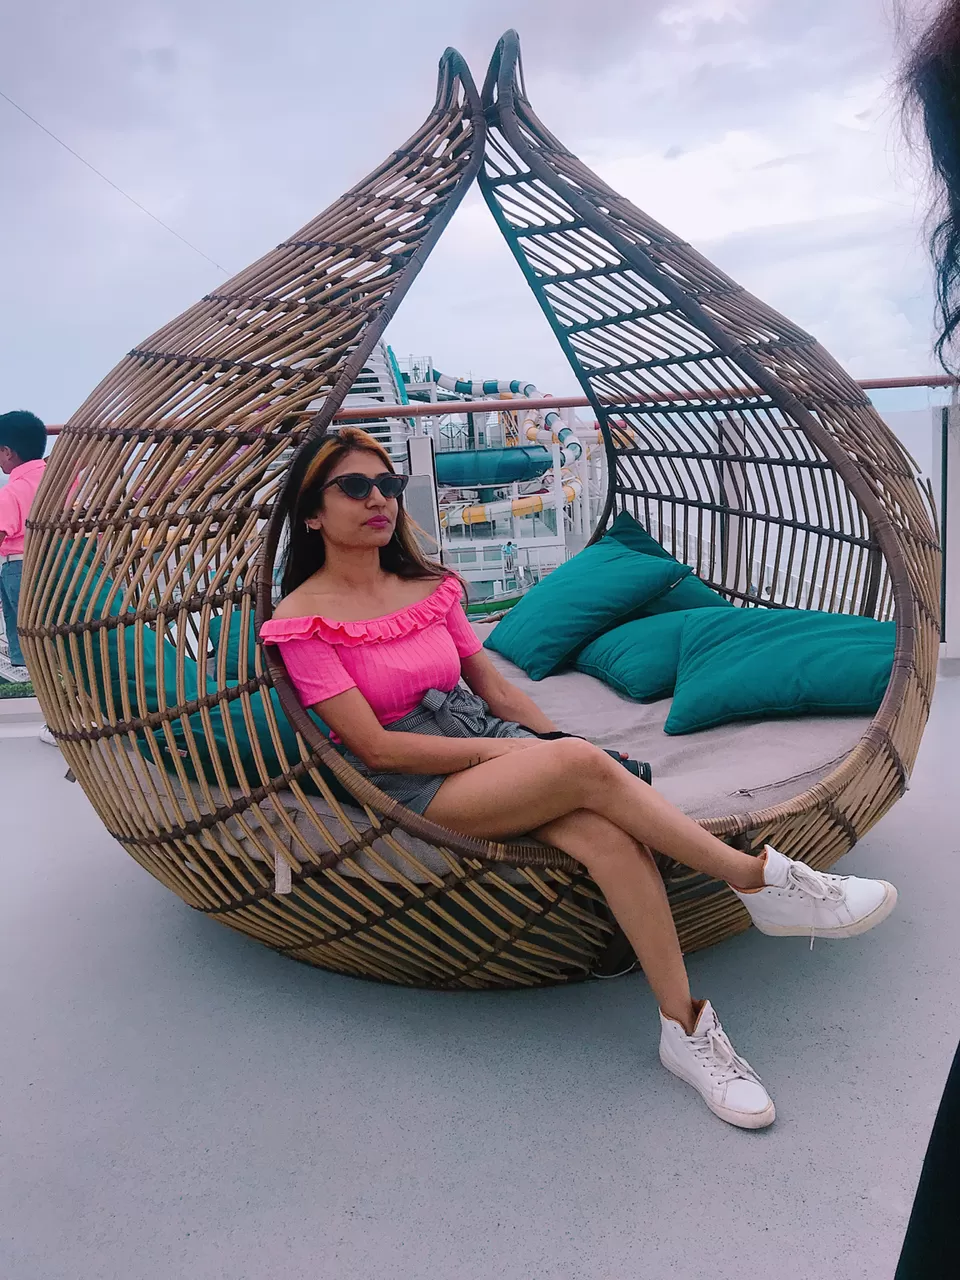 Photo of Dream Cruises Singapore Is the Perfect Weekend Getaway You Have Been Looking For! by Vandana Goenka